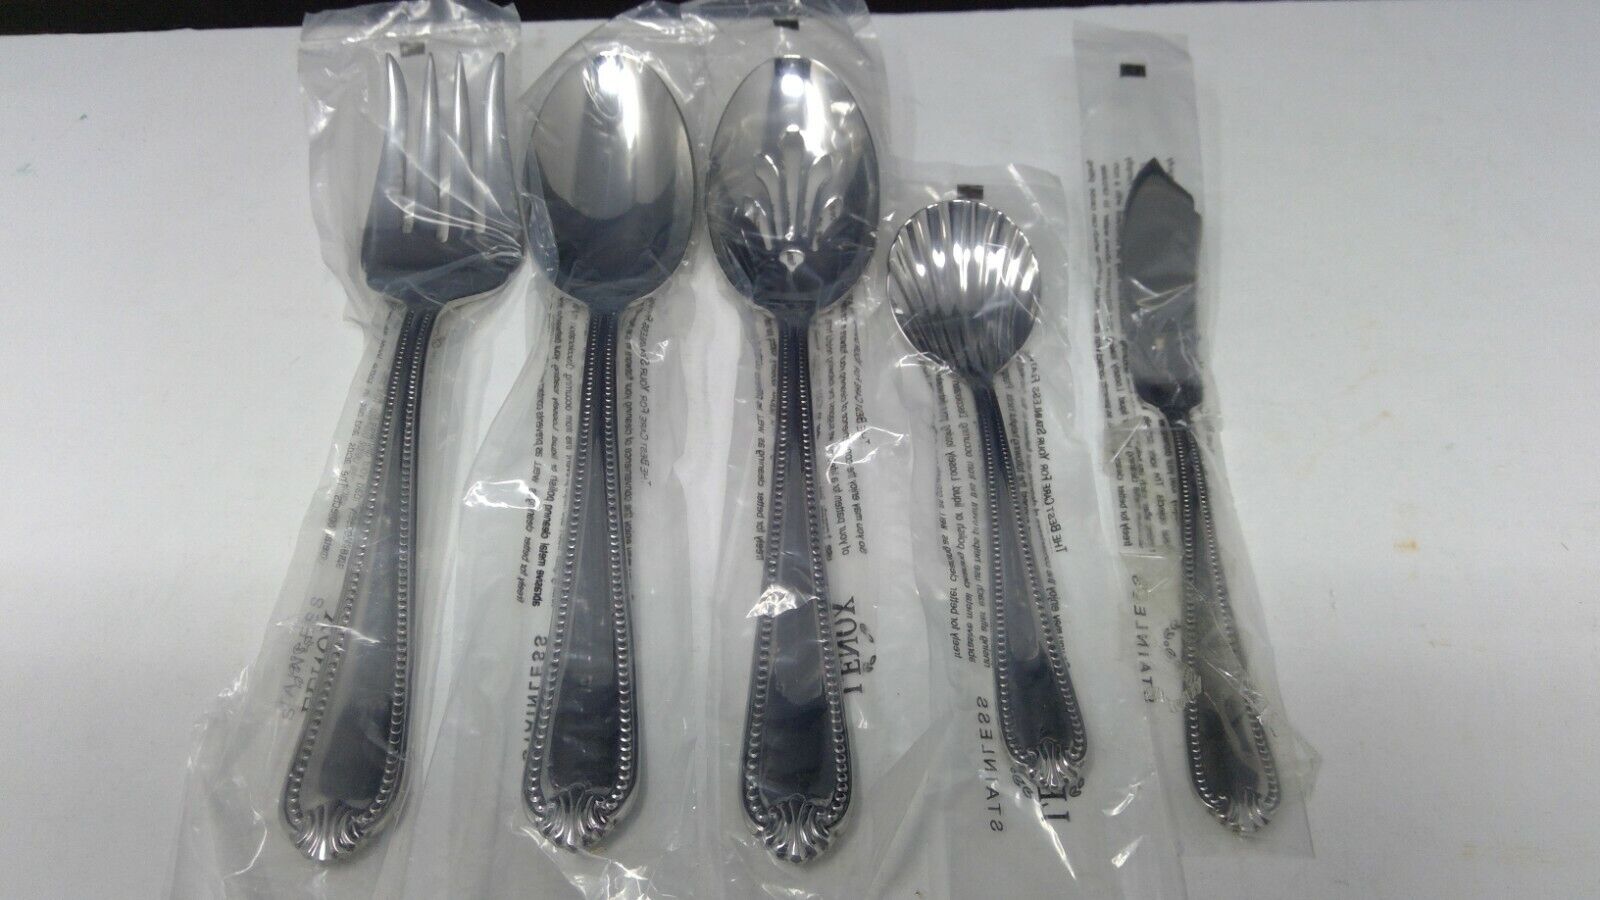 NIP Lenox Bead Glossy 18/10 Stainless Set of 5 Serving Pieces Fork Knife Spoon